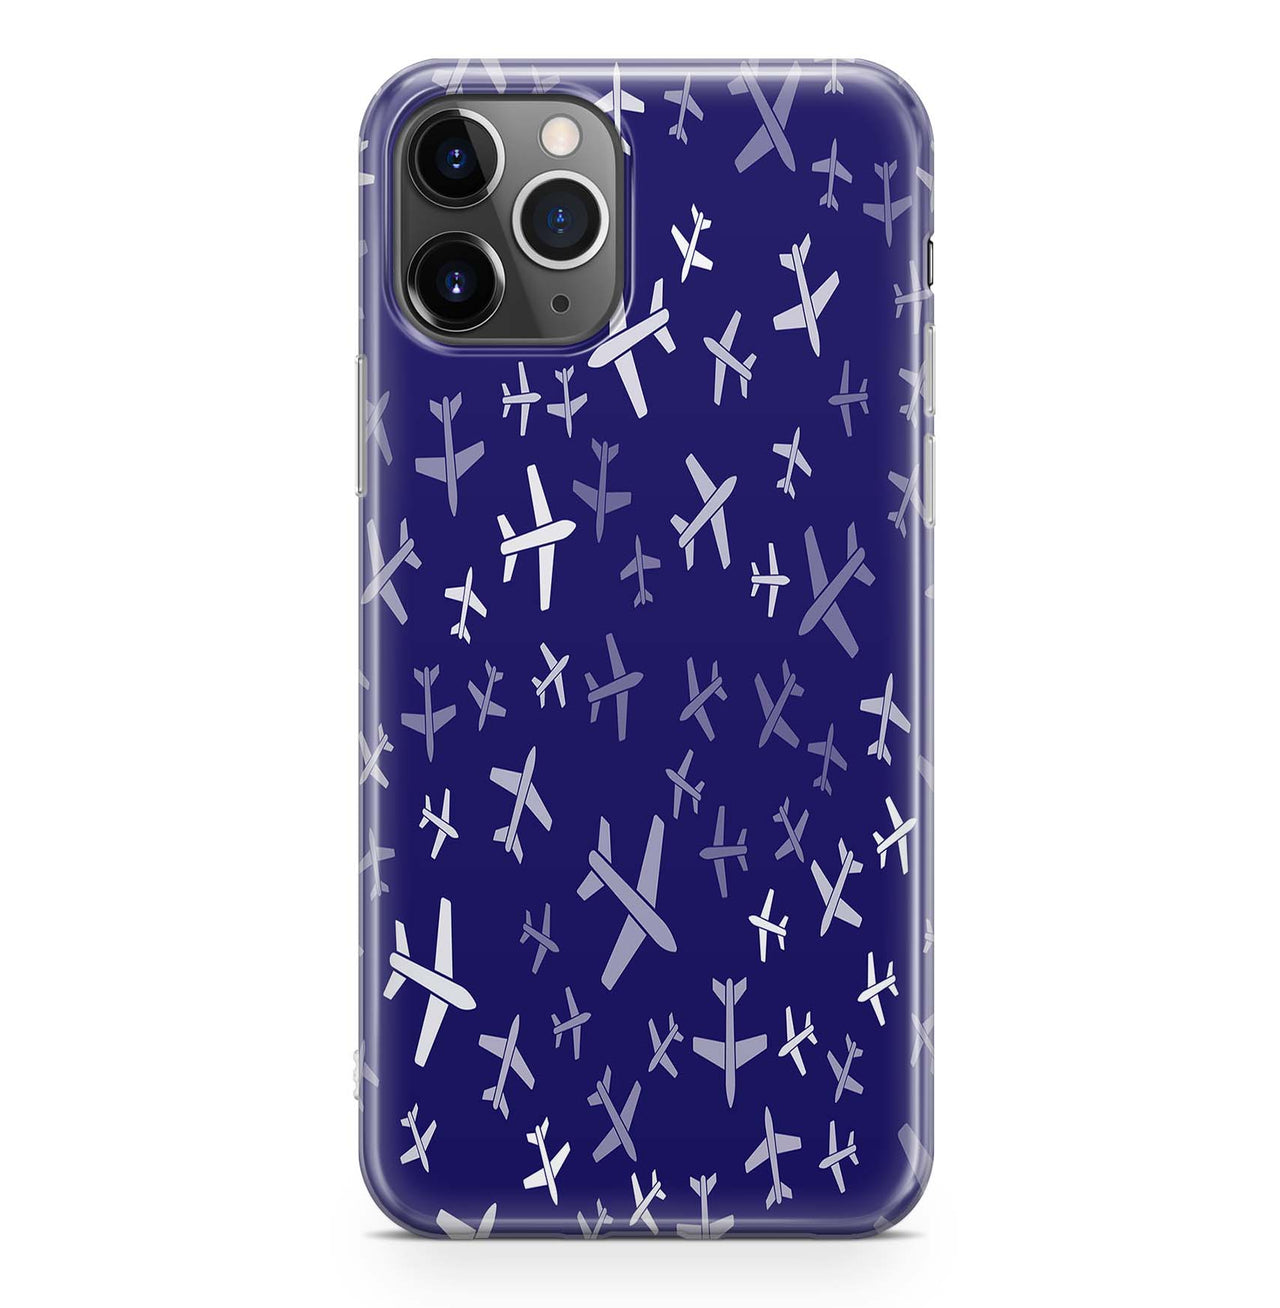 Different Sizes Seamless Airplanes Designed iPhone Cases